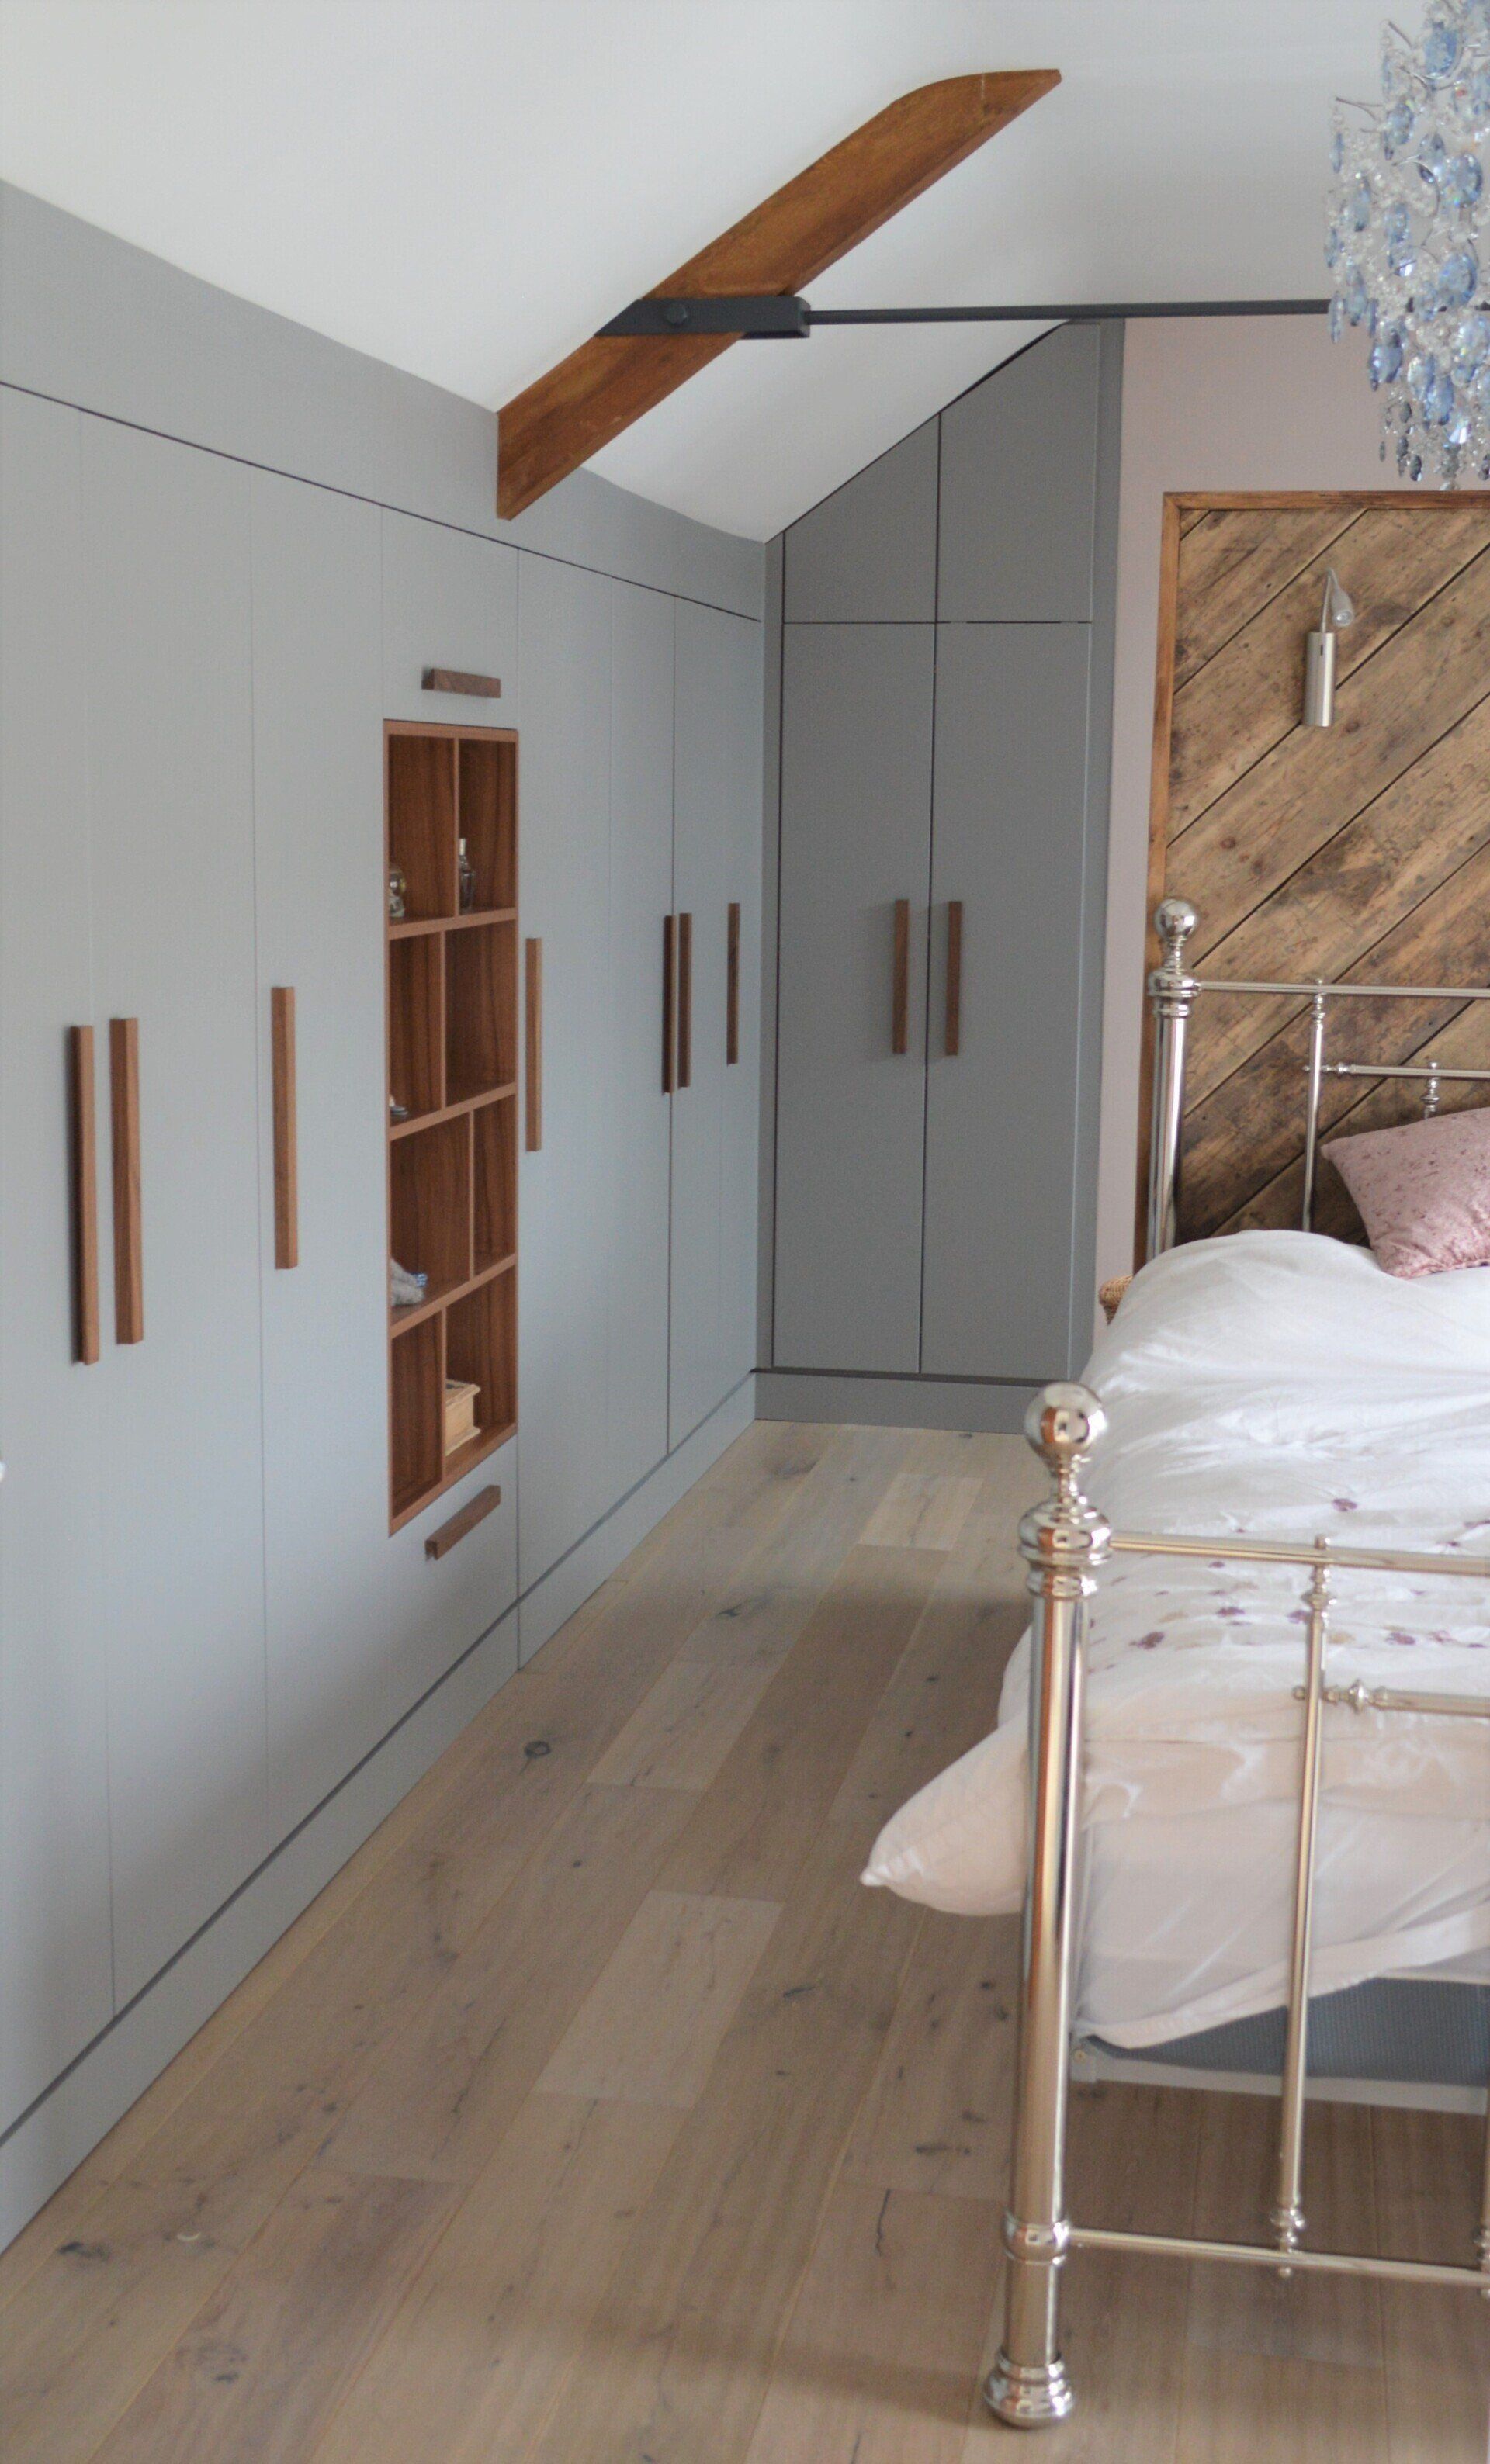 Bespoke wardrobe in walnut and light grey with open unit for display, including angled wardrobes and light wood floor with metal frame bed